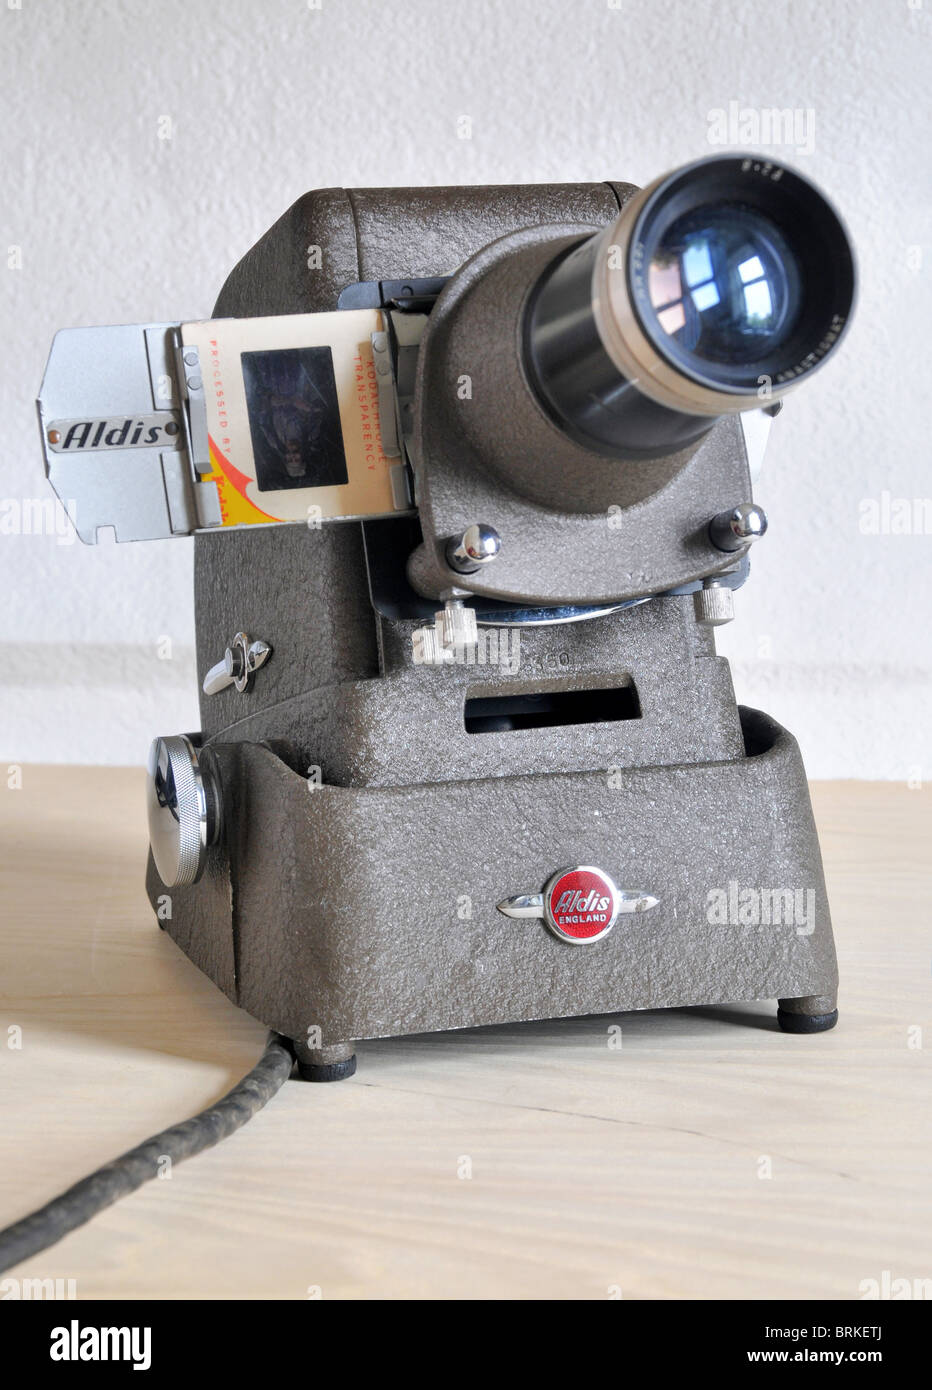 An old fashioned slide projector Stock Photo